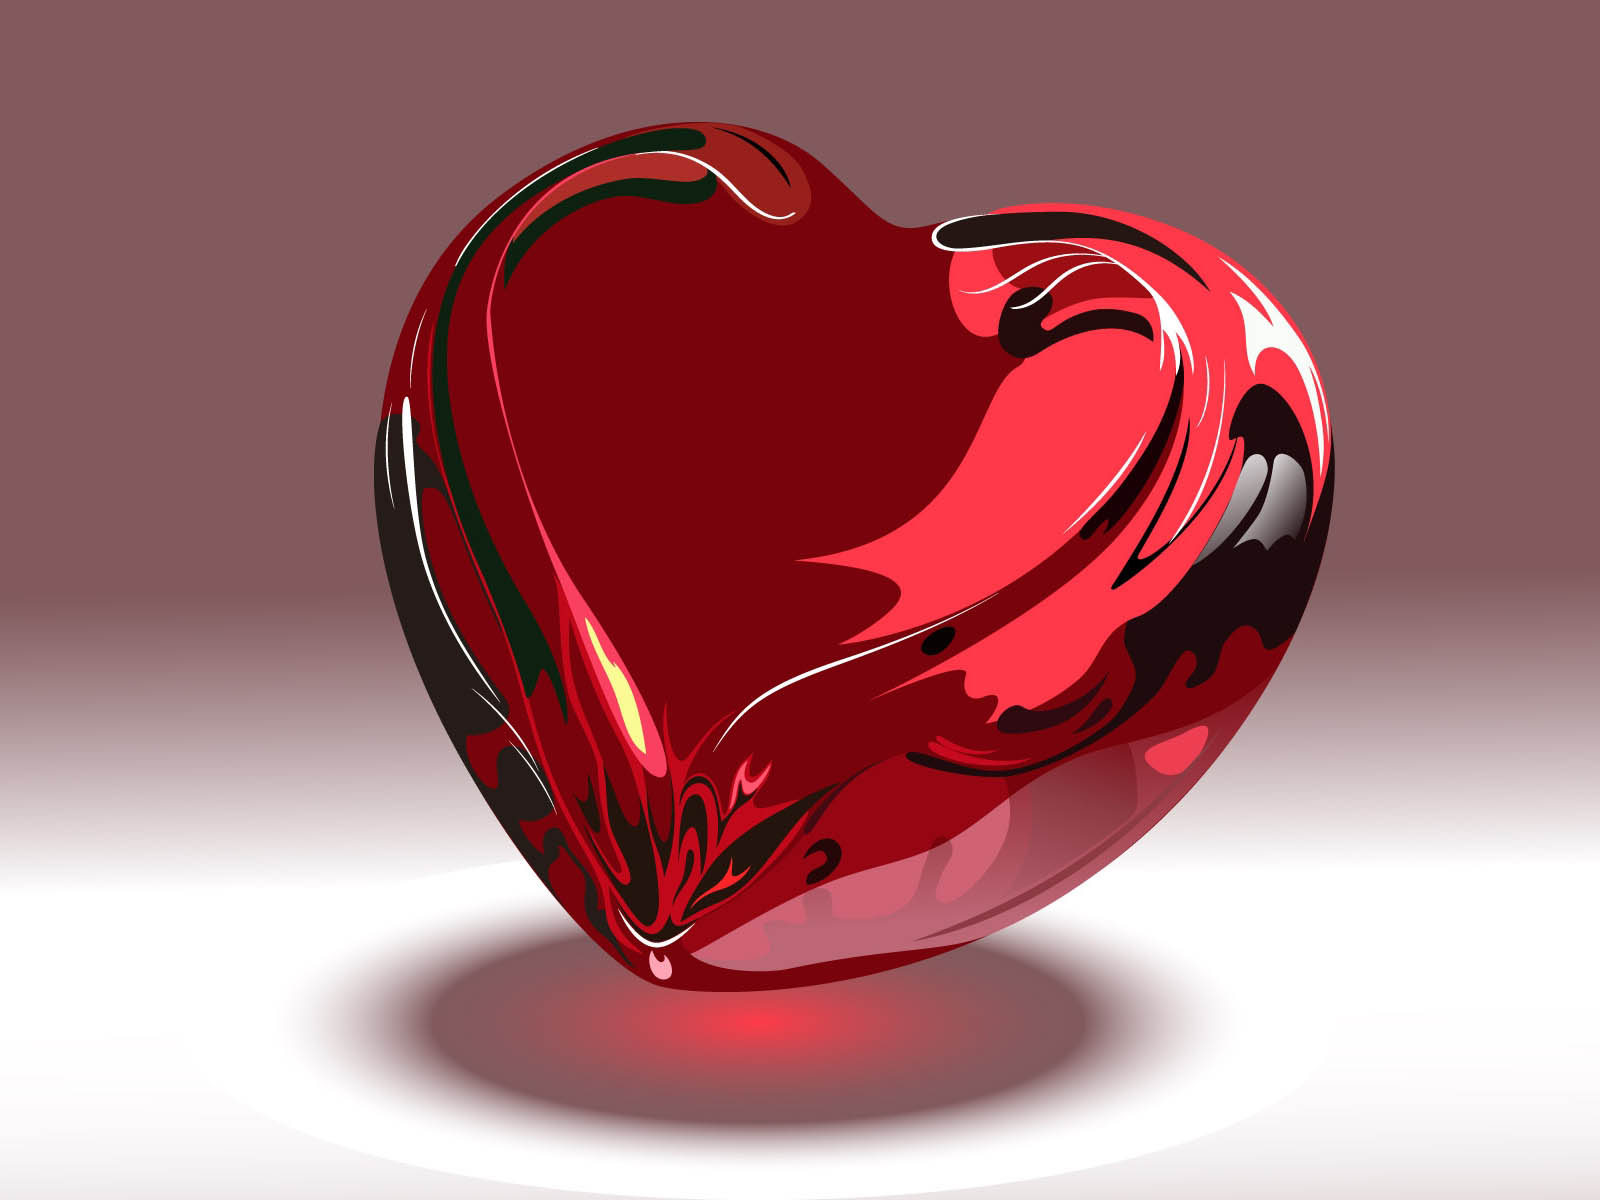 Red Hearts Wallpaper Image Photos Pictures And Background For